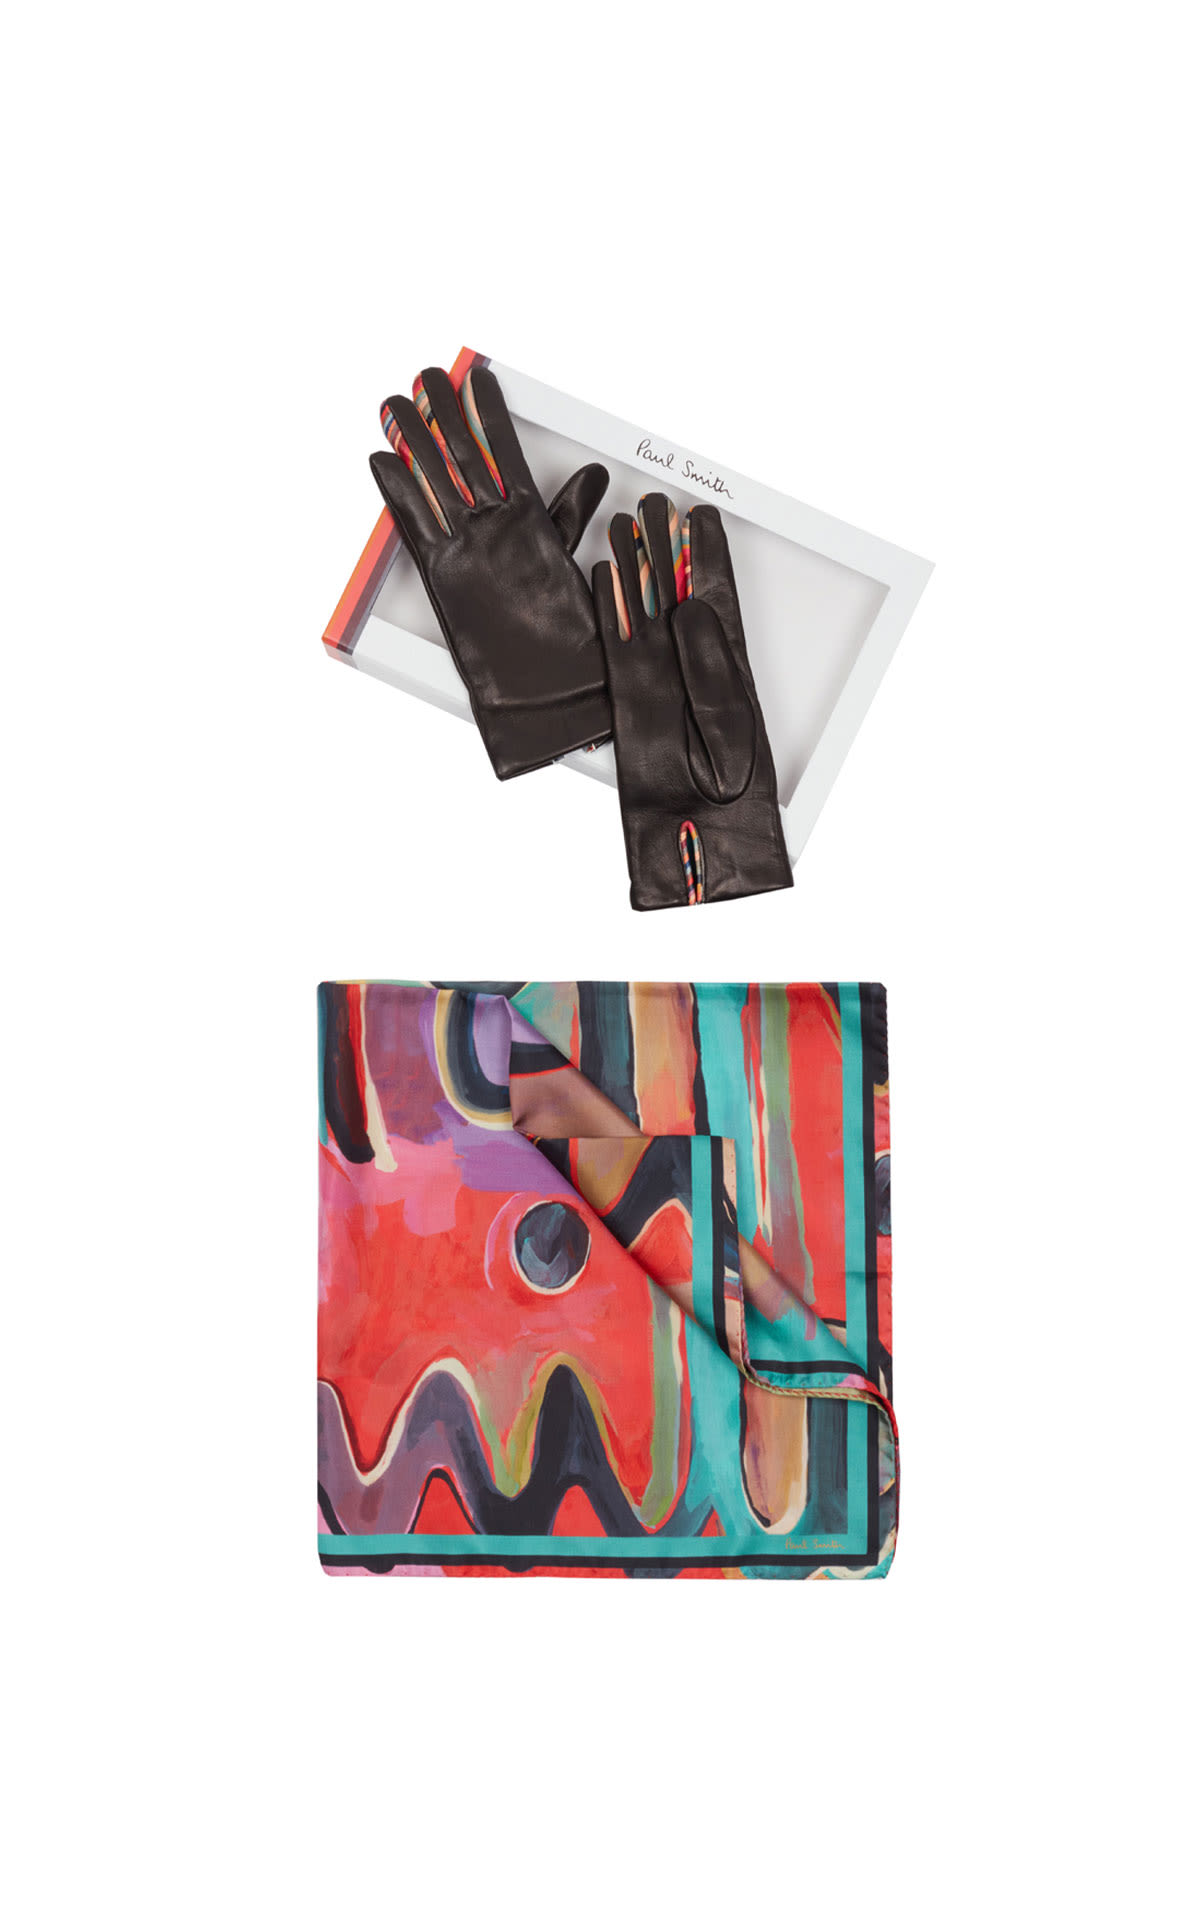 Paul Smith Scarf and gloves gift set from Bicester Village